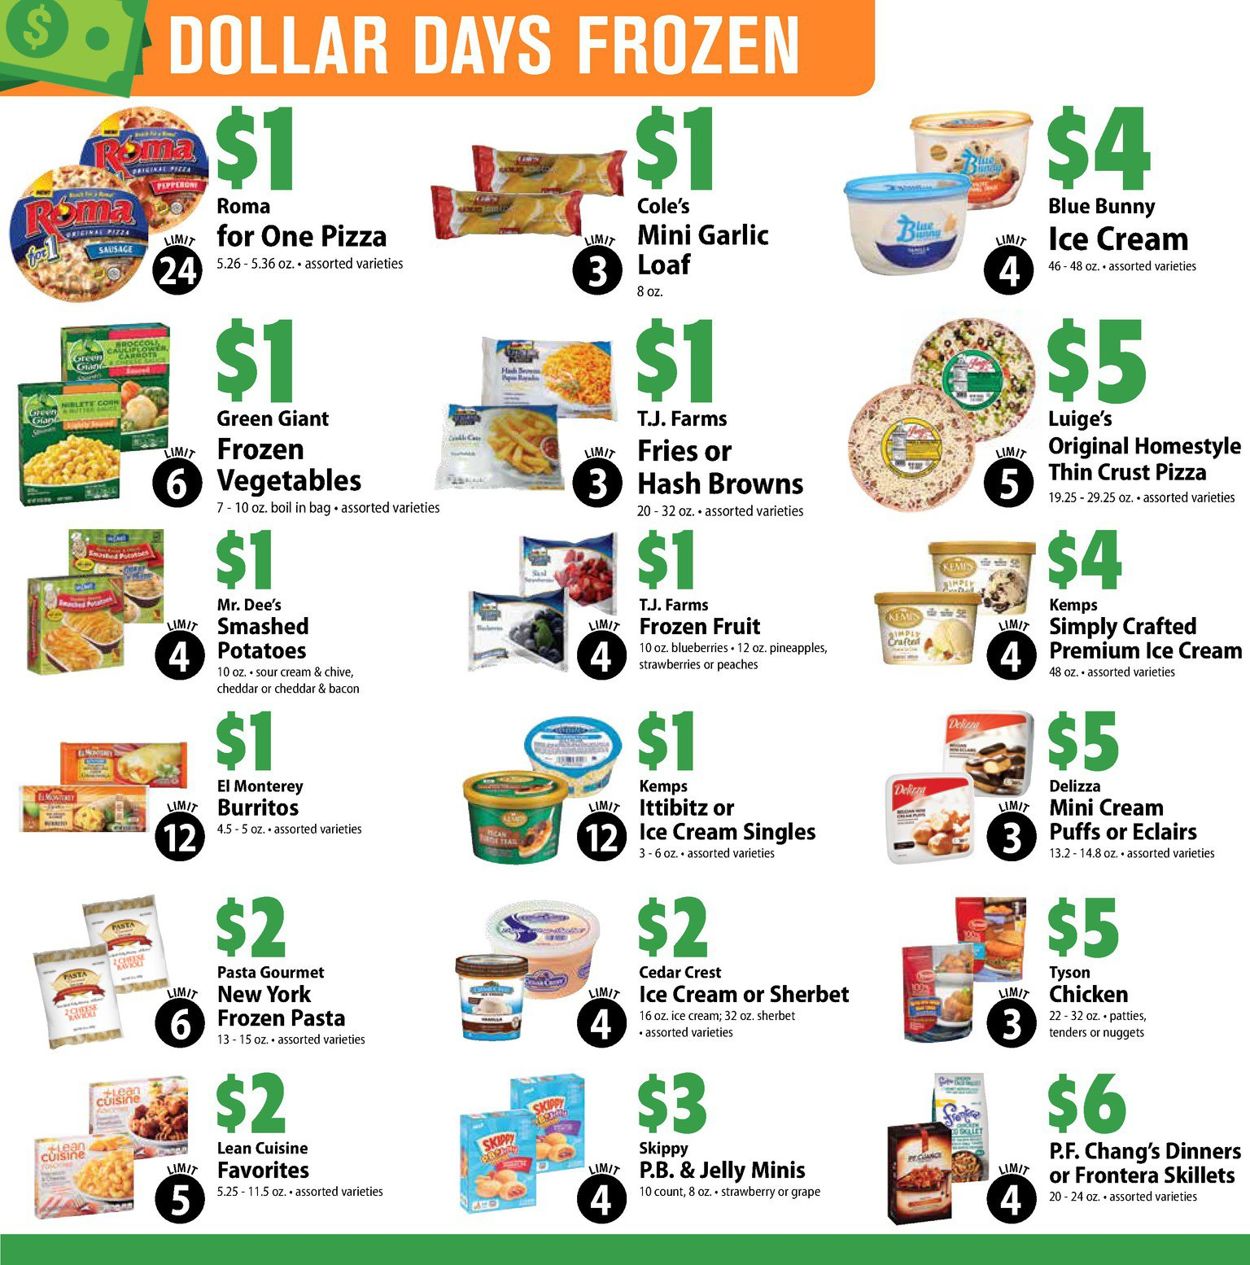 Festival Foods Ad from 08/21/2019